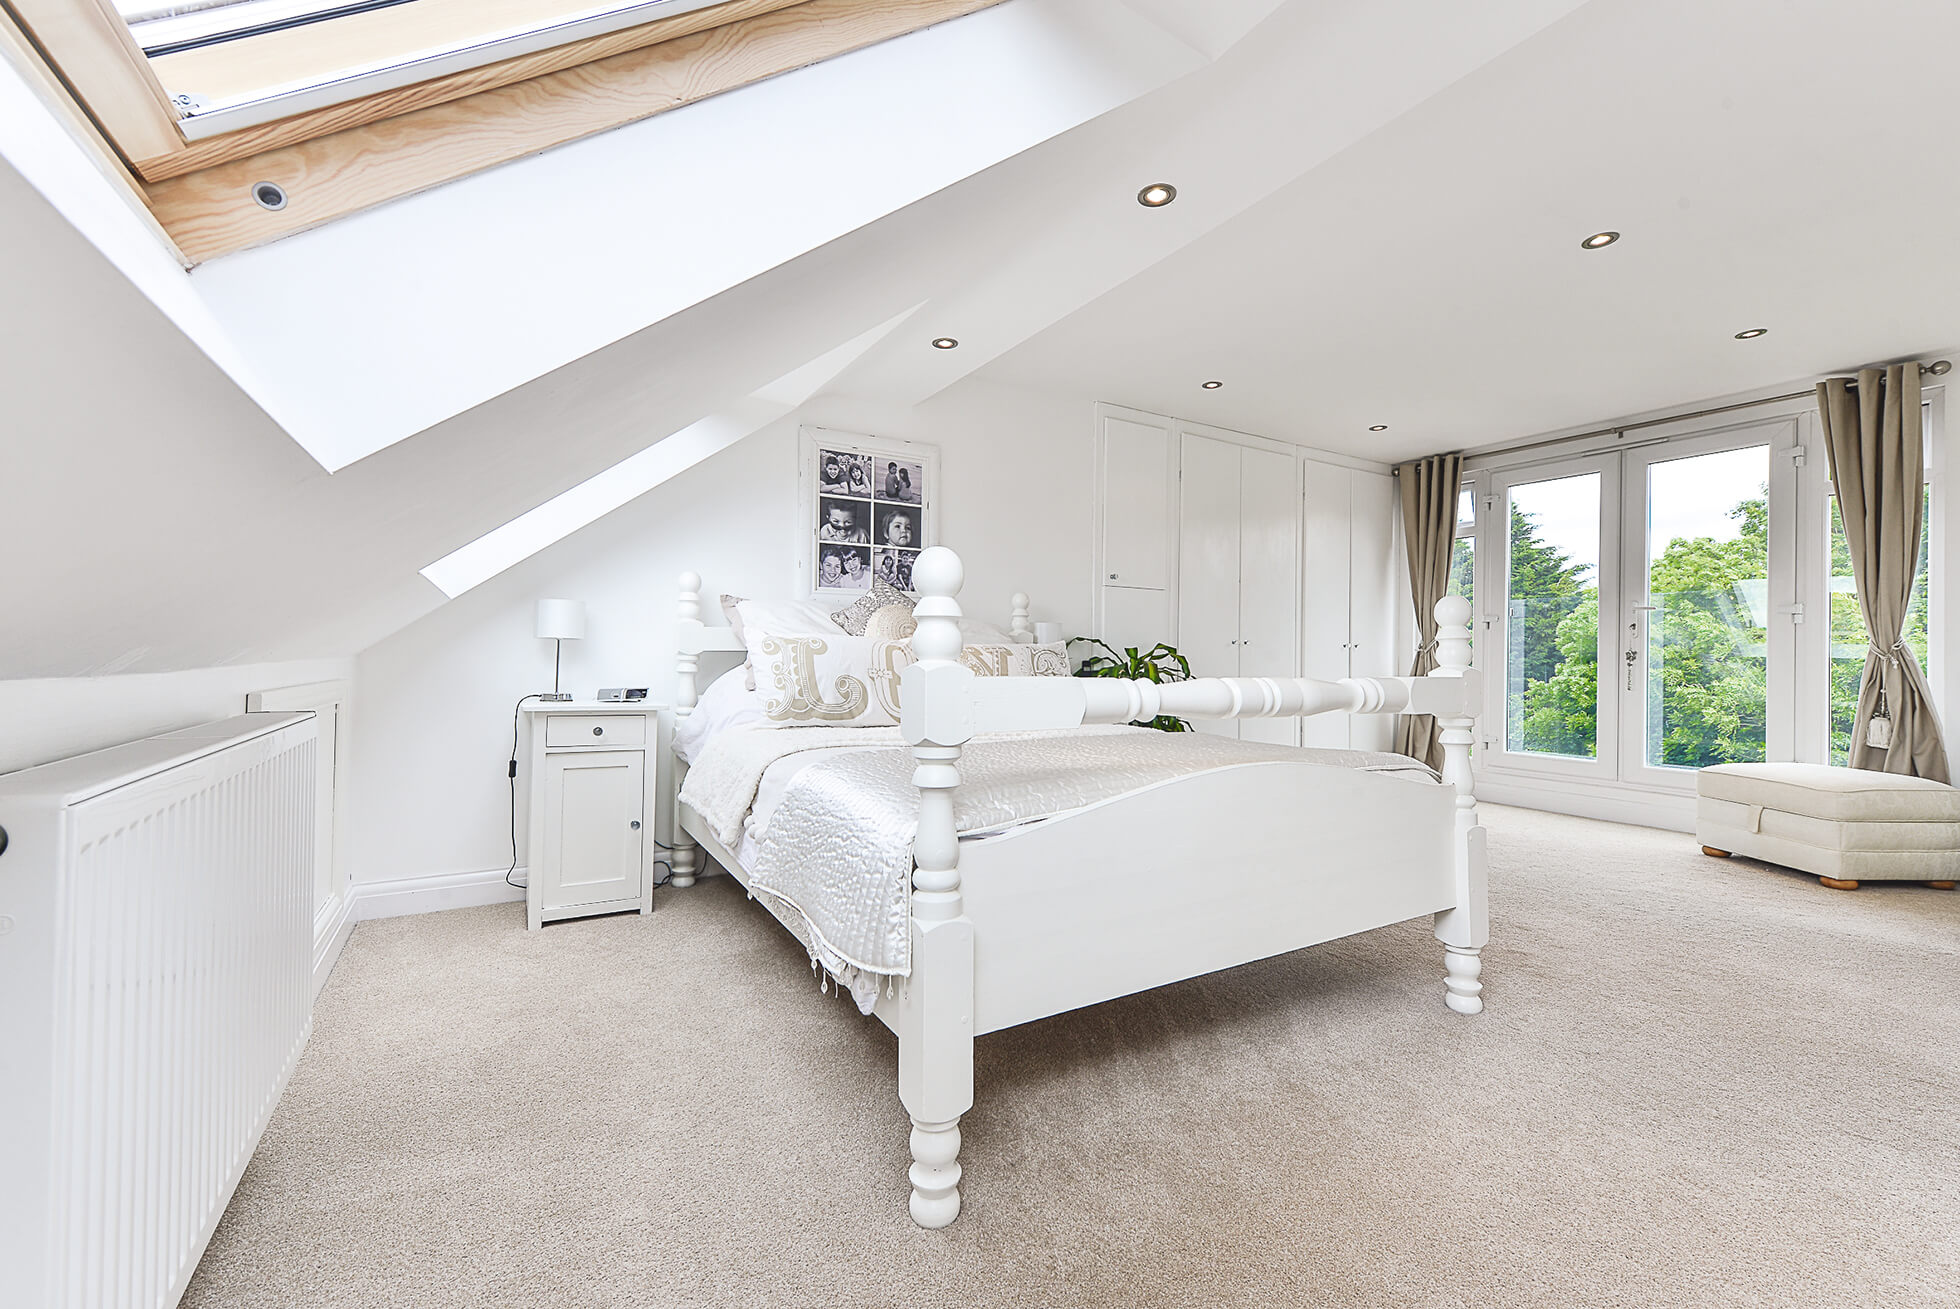 Do you have a question about converting your Loft in Bayford? Here are the most popular questions asked by our clients.